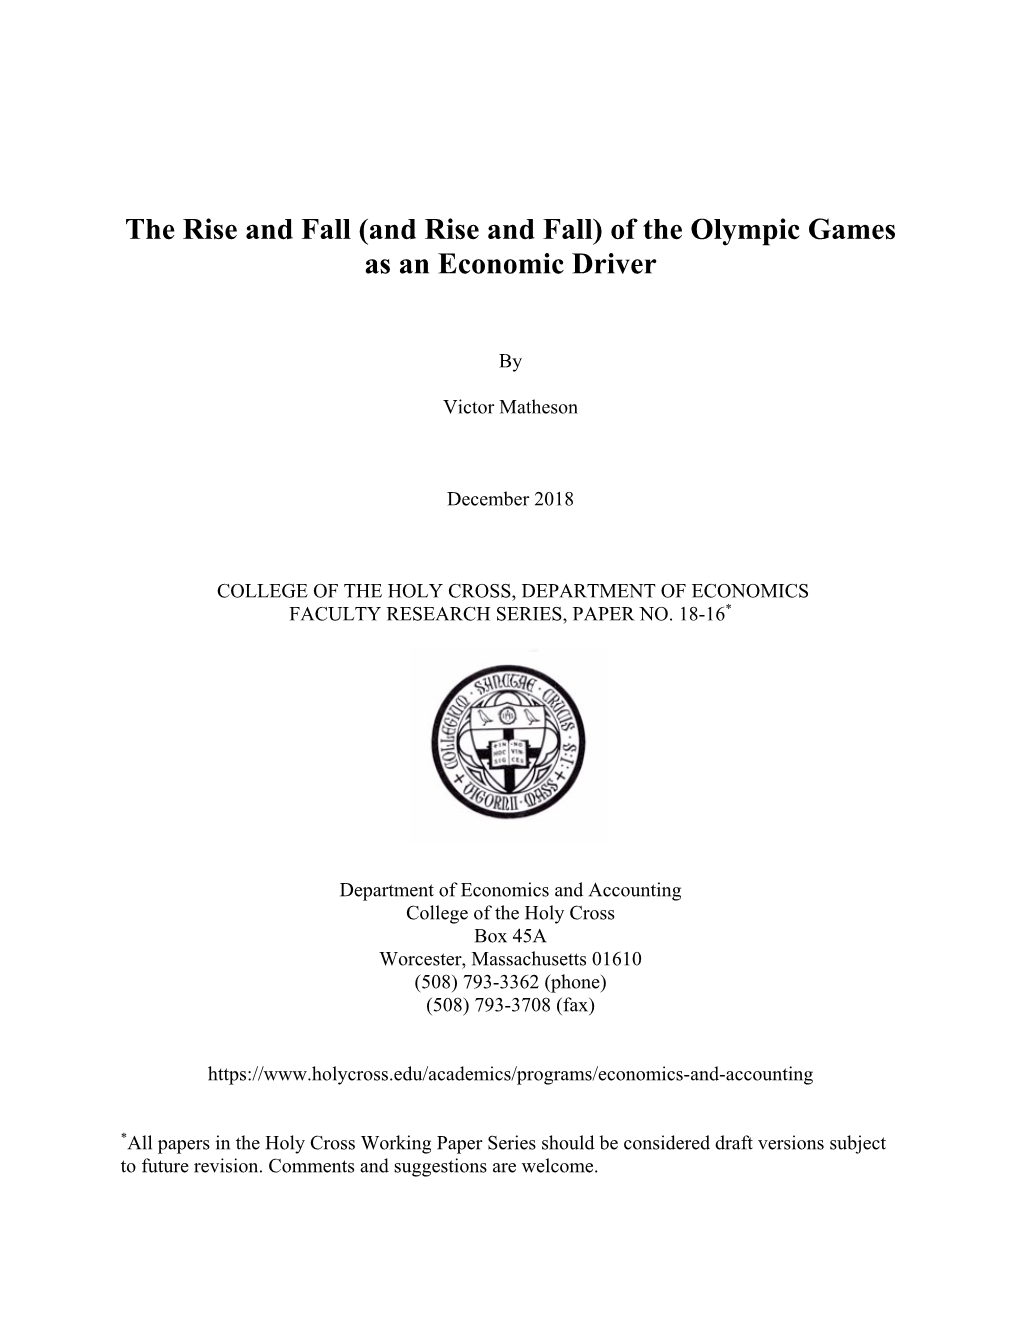 (And Rise and Fall) of the Olympic Games As an Economic Driver